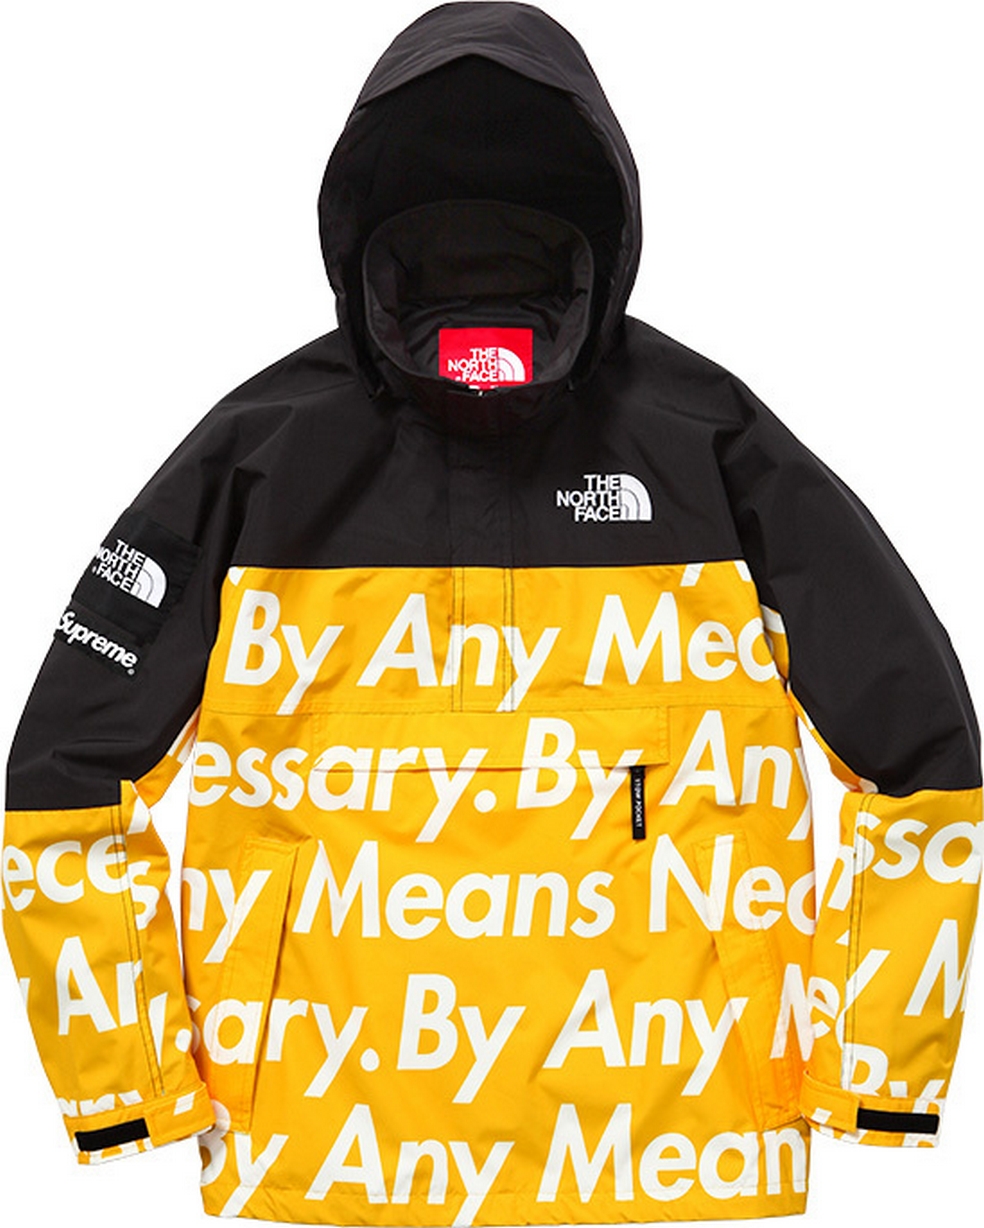 Supreme x The North Face "By Any Means Necessary" Drops Today | The Source